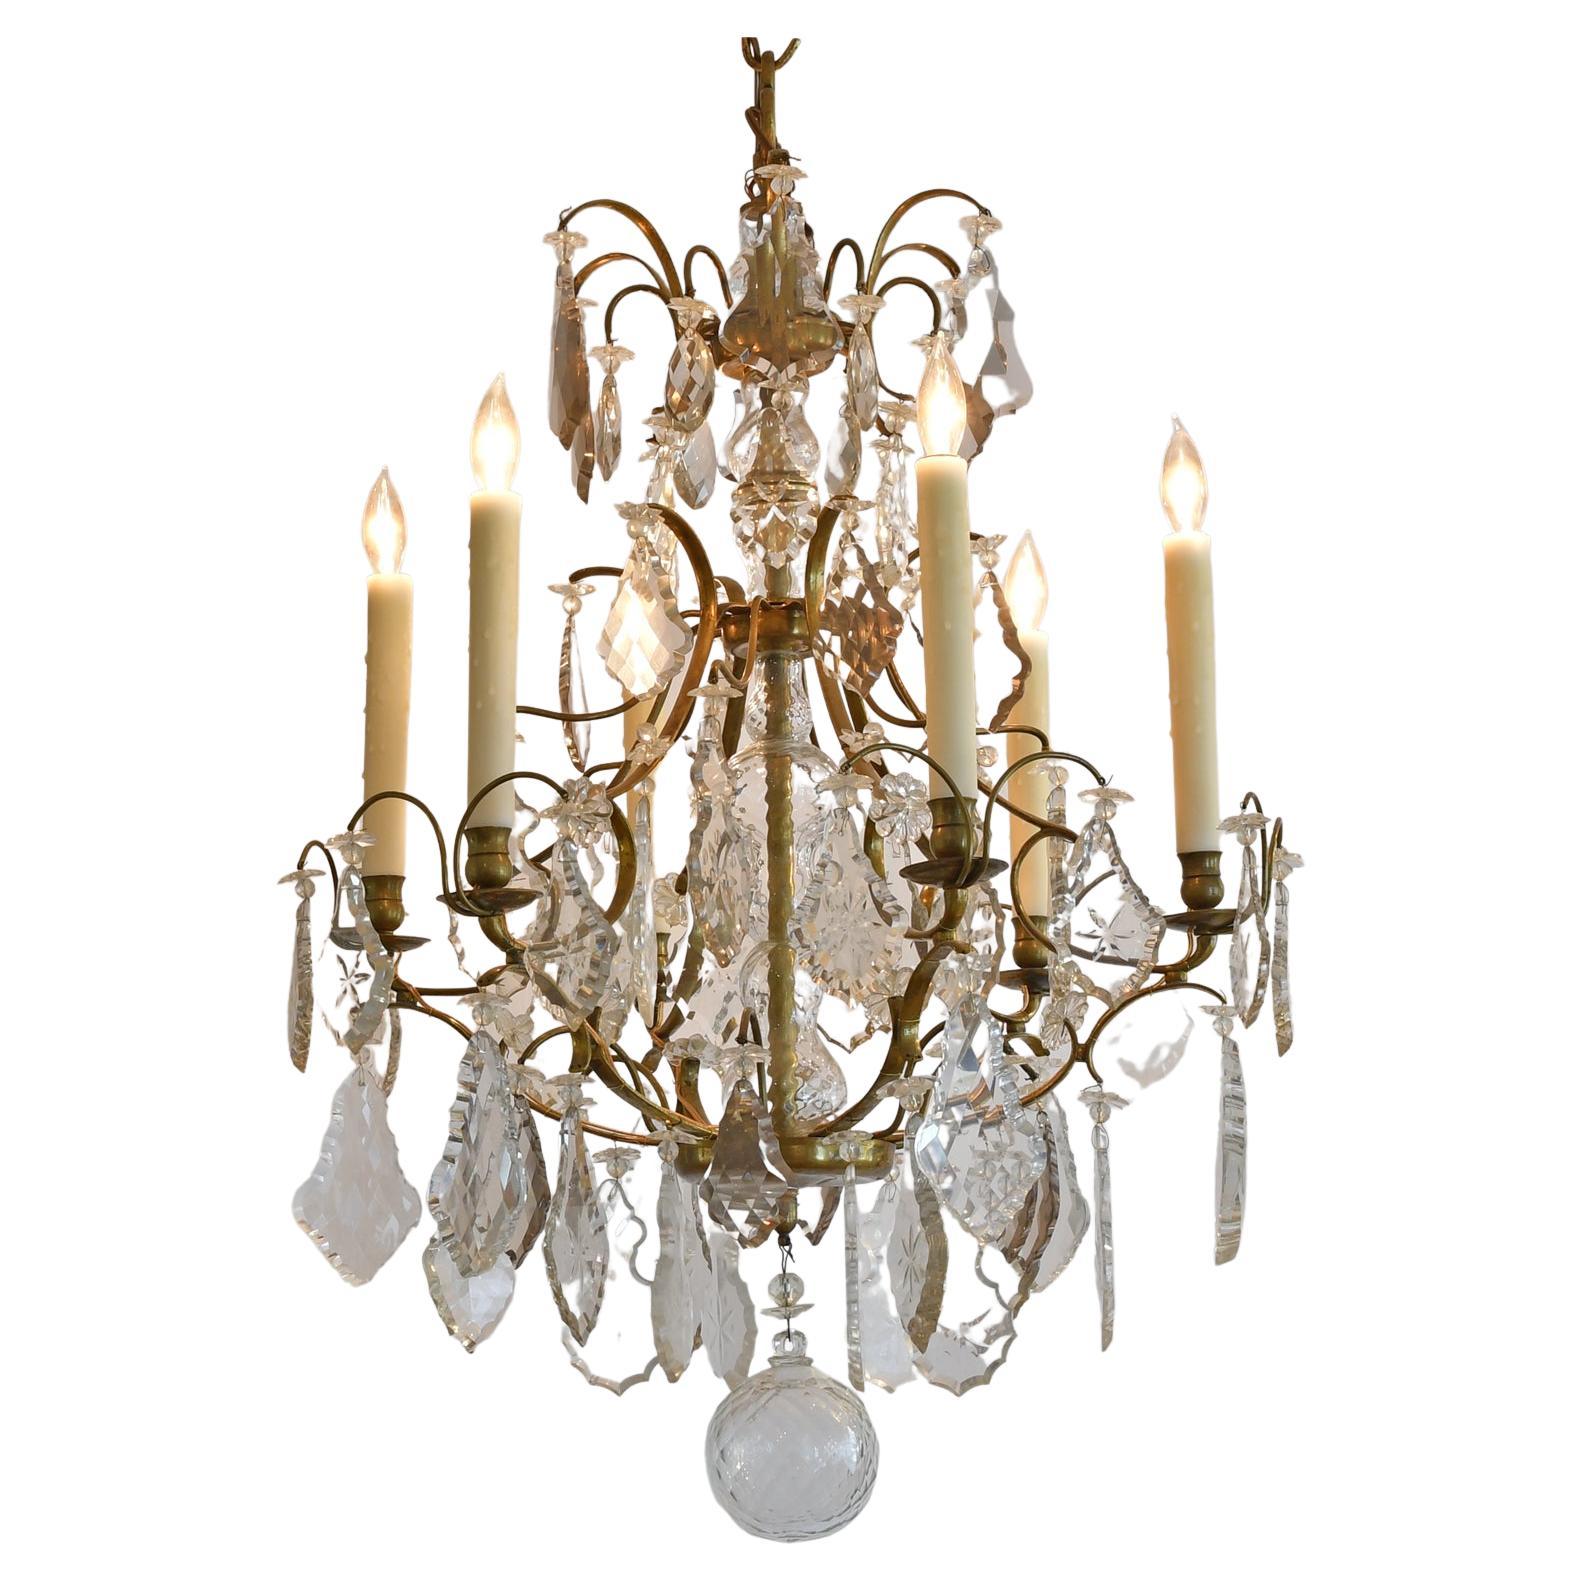 An exquisite mid 19th century baroque-style chandelier with bronze armature offering six (6) lights with finely cut and beveled clear quartz crystal prisms featuring seven different designs, one for each of the tiers, and ranging in shape from leaf,